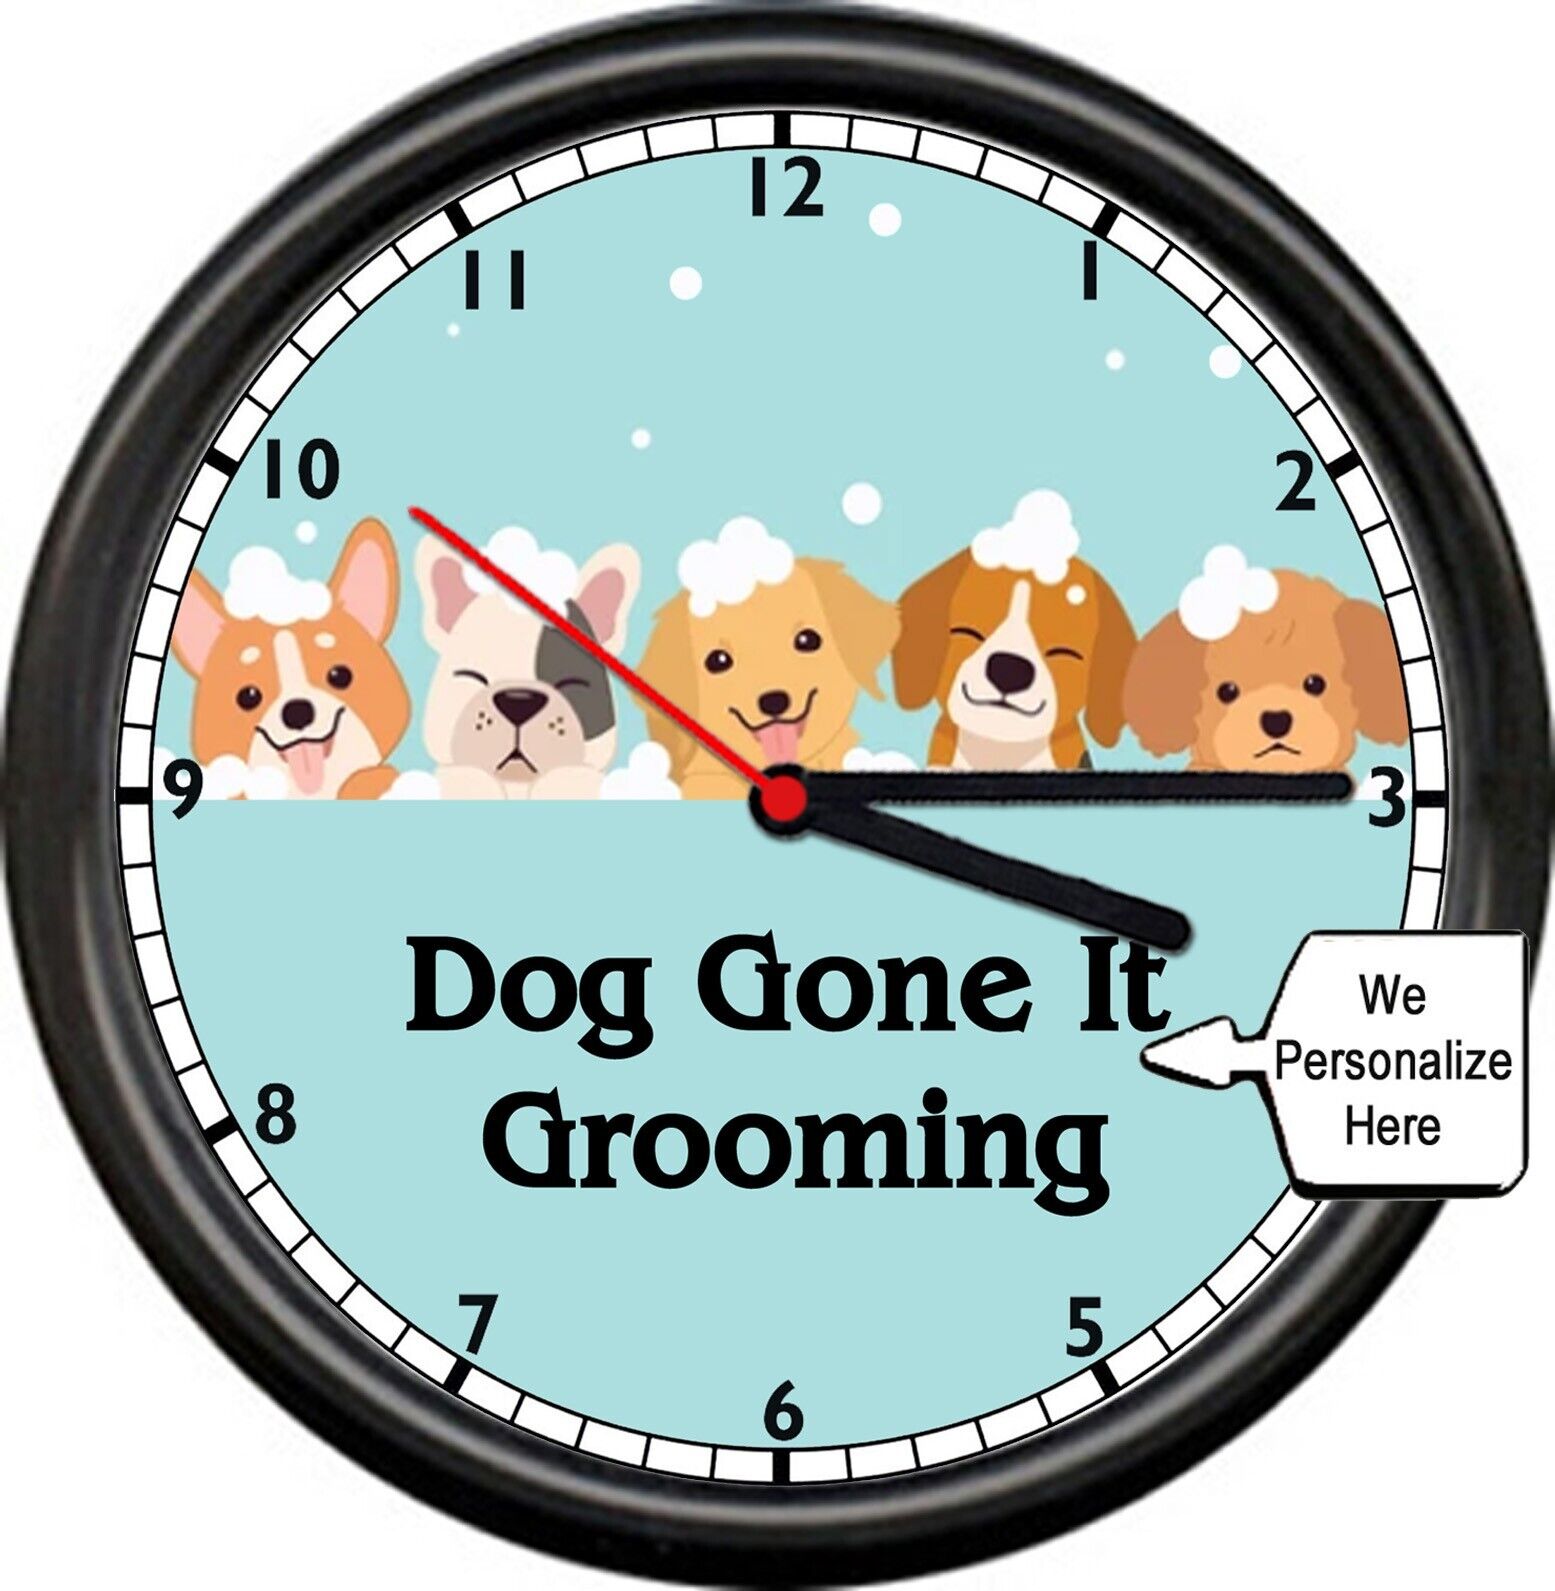 NEW Personalized Gift Dog Grooming Pet Store Groomer Wash Bath Sign Wall Clock